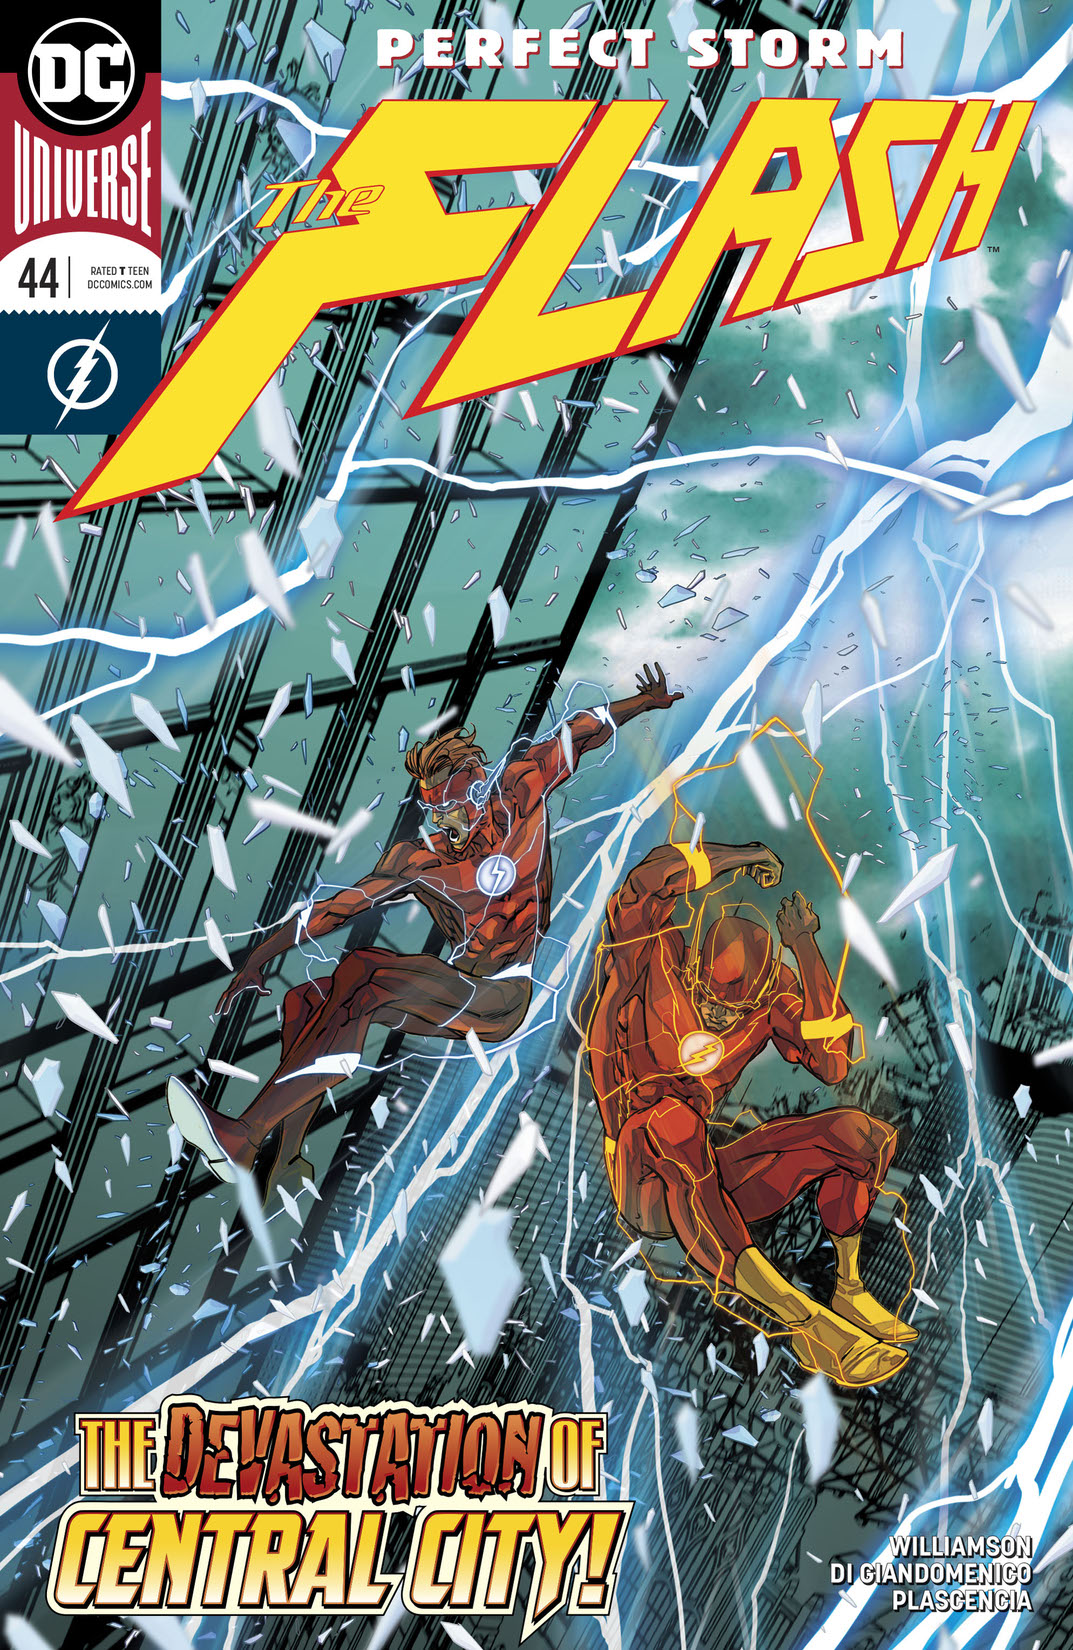 The Flash (2016-) #44 preview images